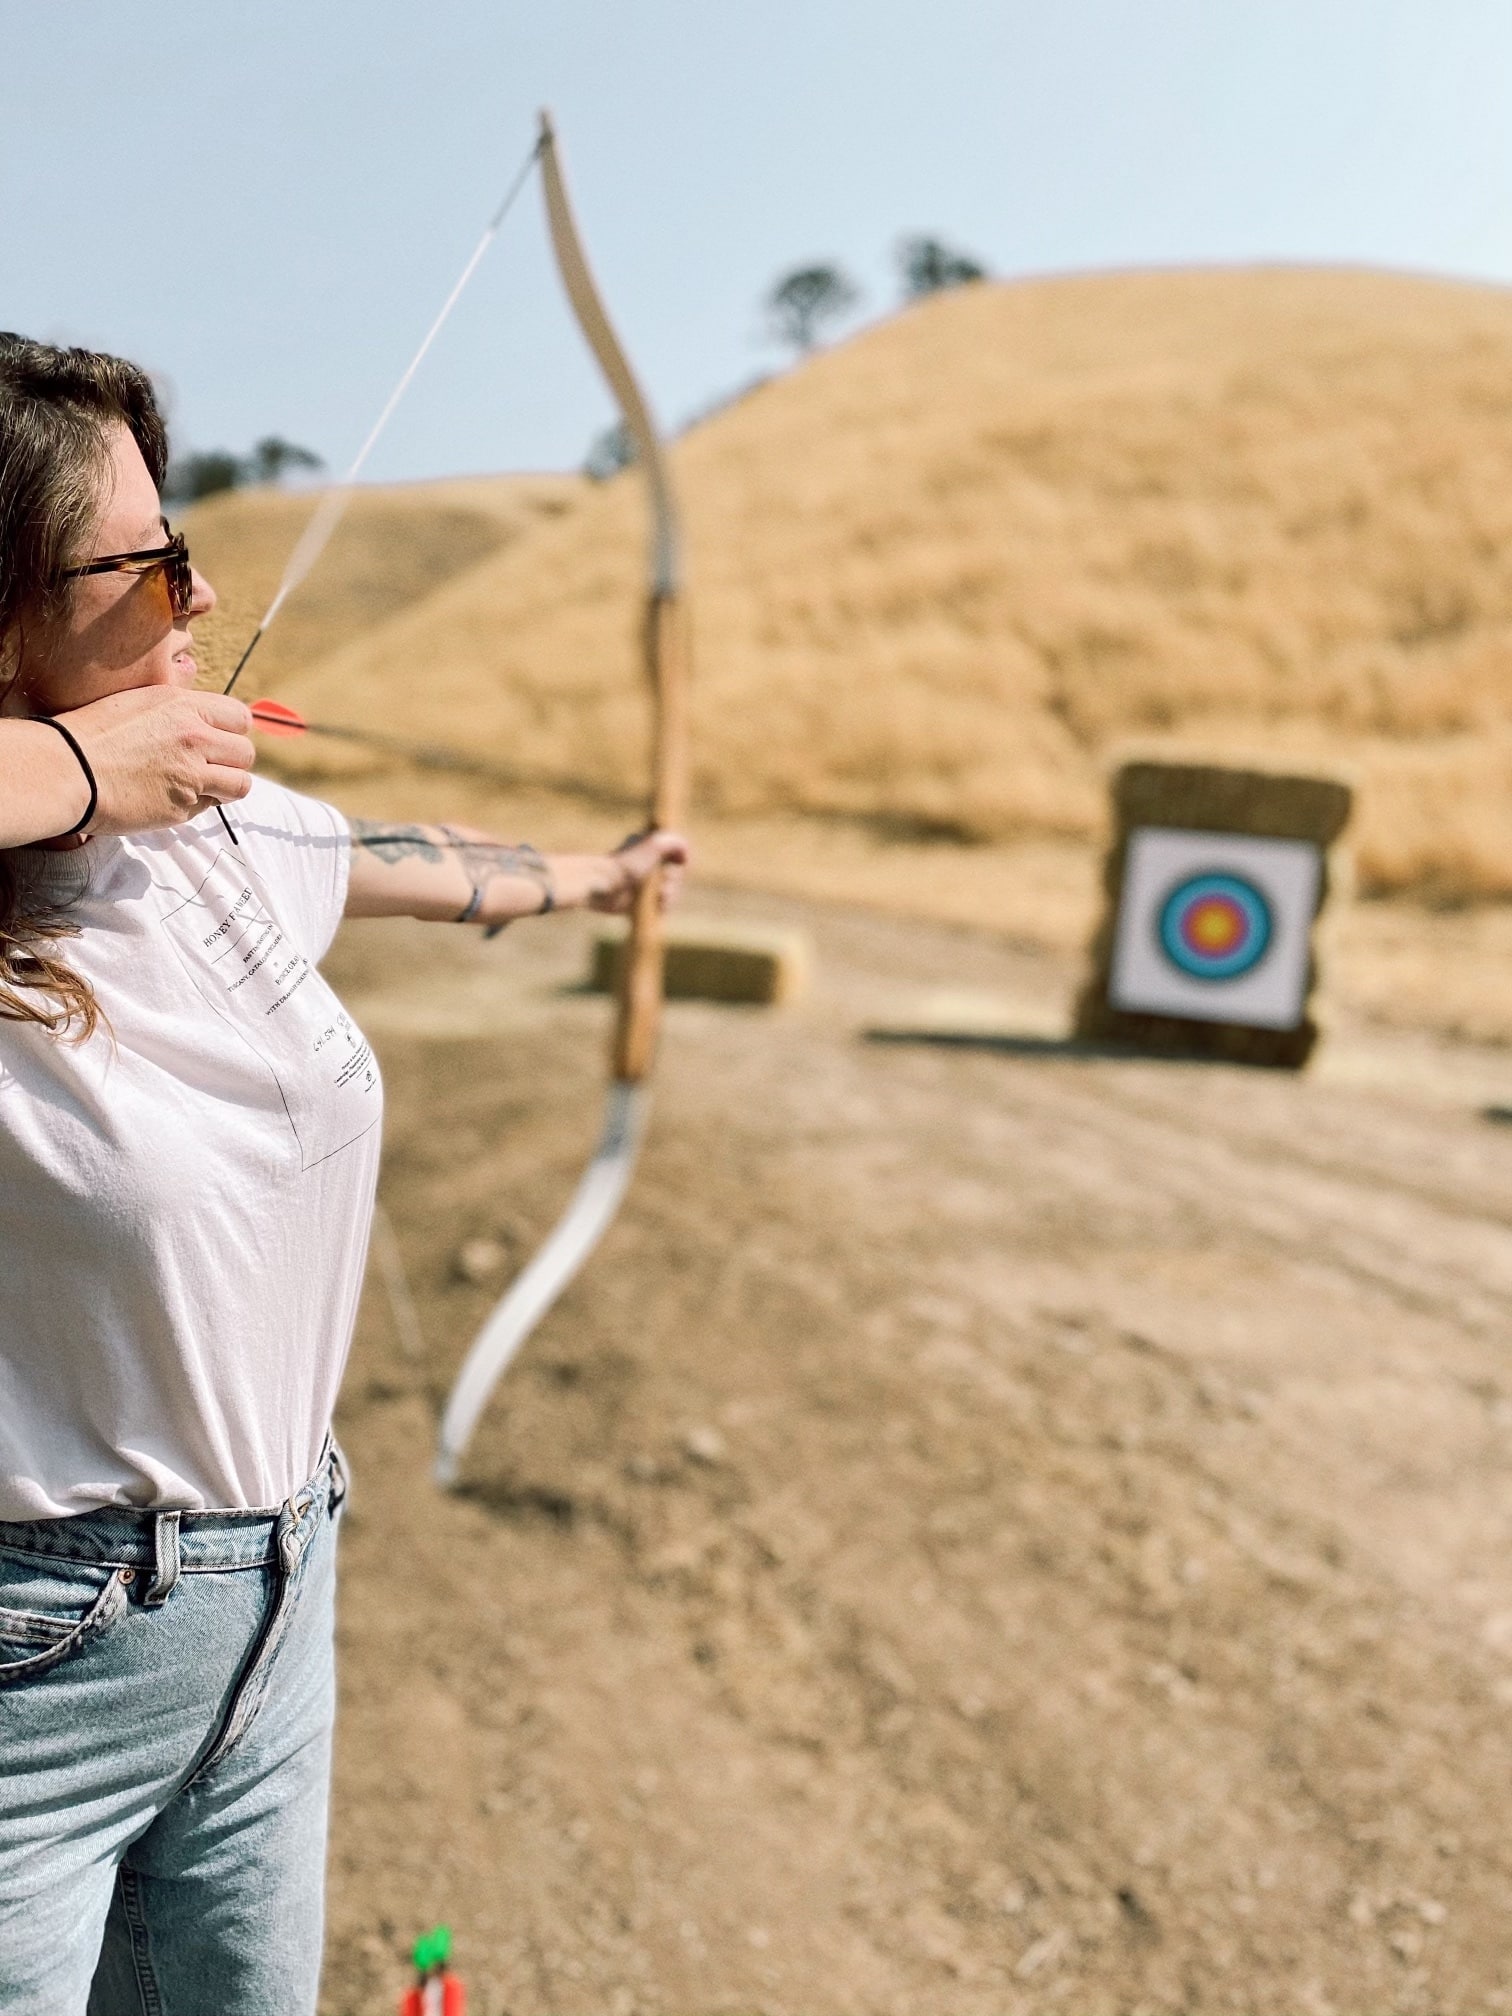 A focused woman practicing archery at Cass Winery during the Camp Cass program, with a target in the distance on a sunny day.